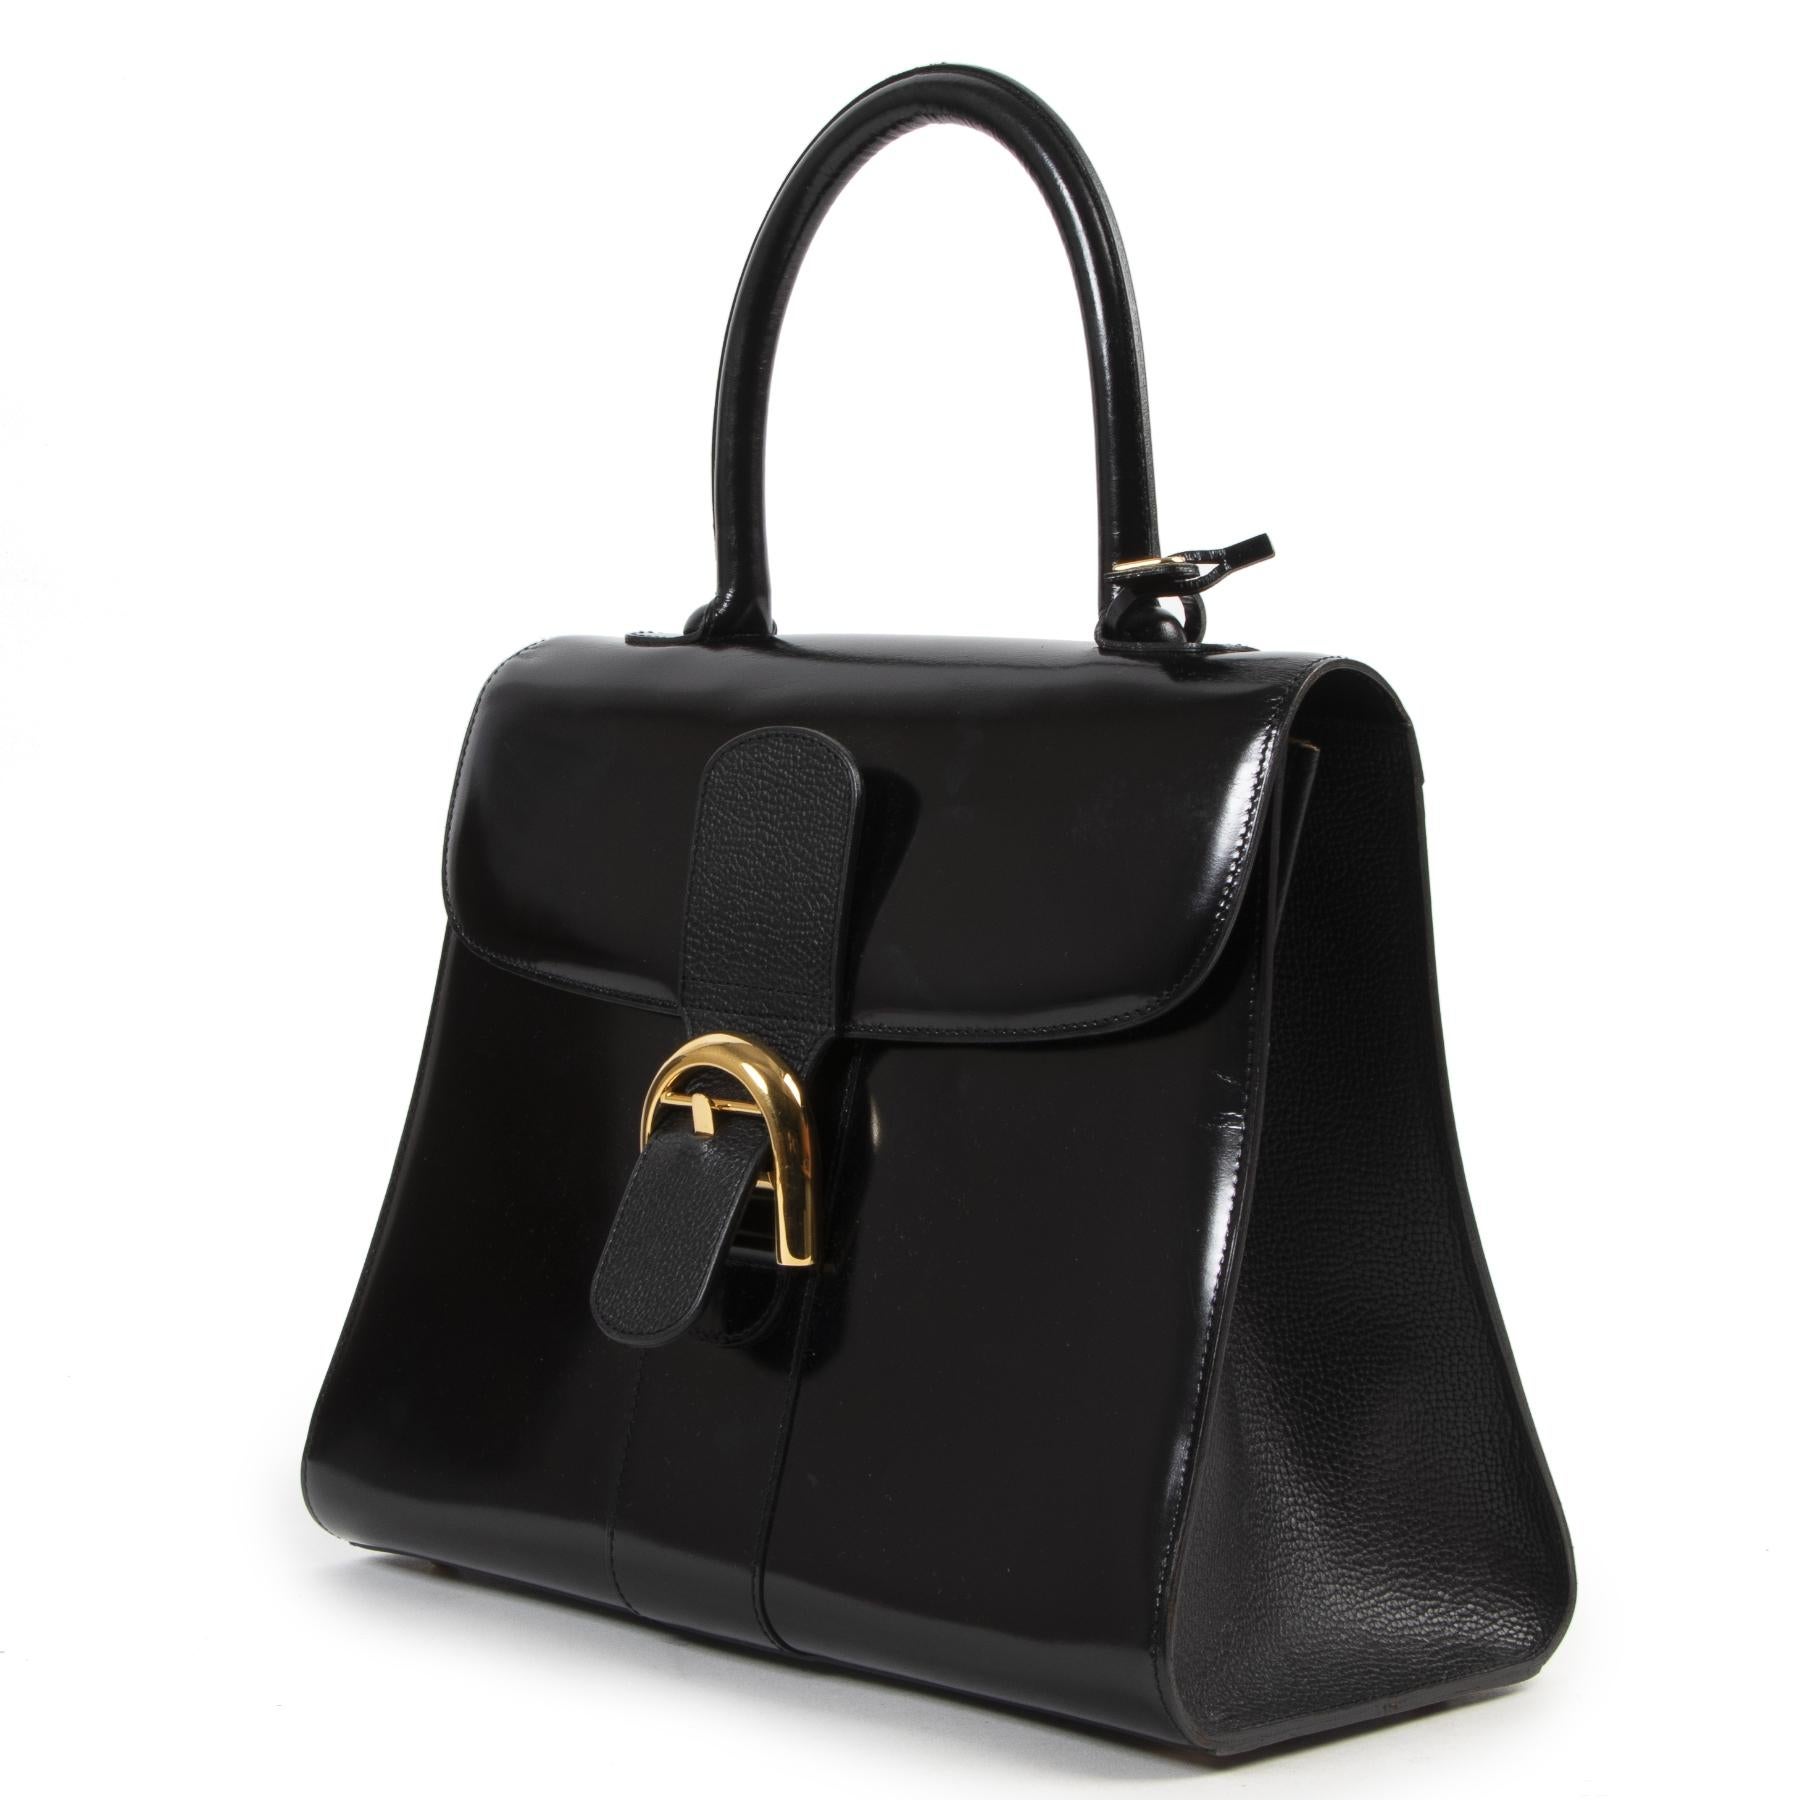 

Very good condition

Delvaux Black Magic Brillant MM

The Brillant from Delvaux is a must-have for every fashion lover. This bag comes in a beautiful black Magic leather which is the perfect middle way between box calf and patent leather. The